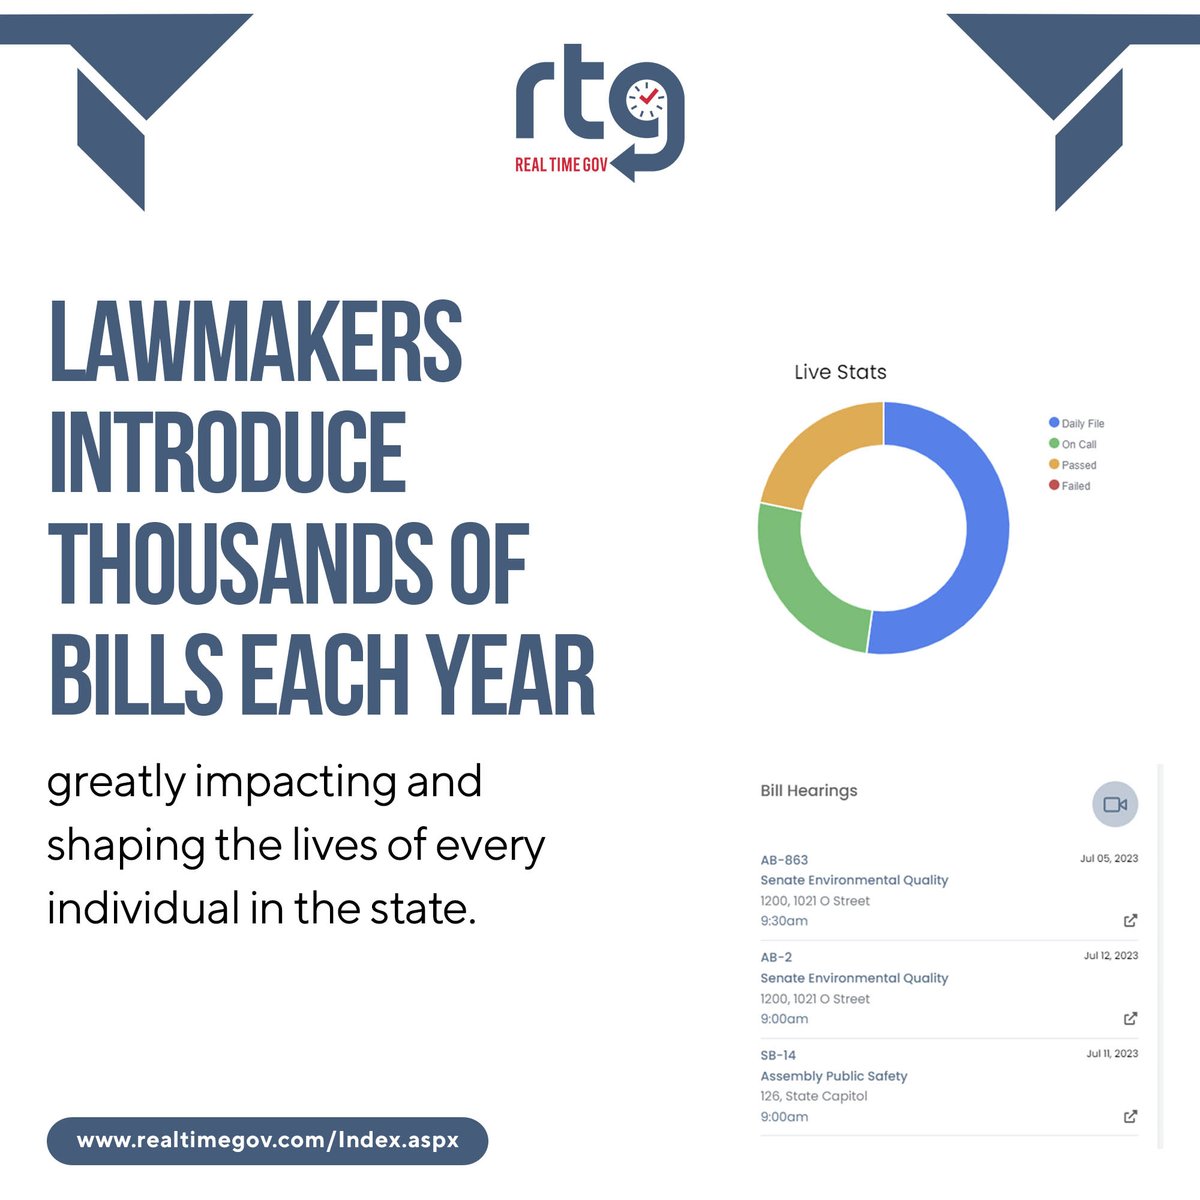 Stay informed with RealtimeGov as we track and analyze these crucial legislative developments.
.
𝑳𝒆𝒂𝒓𝒏 𝑴𝒐𝒓𝒆 👉🏻 realtimegov.com/Index.aspx
.
.
#realtime_gov #TrackBills #Legislators #LegislationMatters #InformedCitizen #StateLawmakers #PolicyChanges